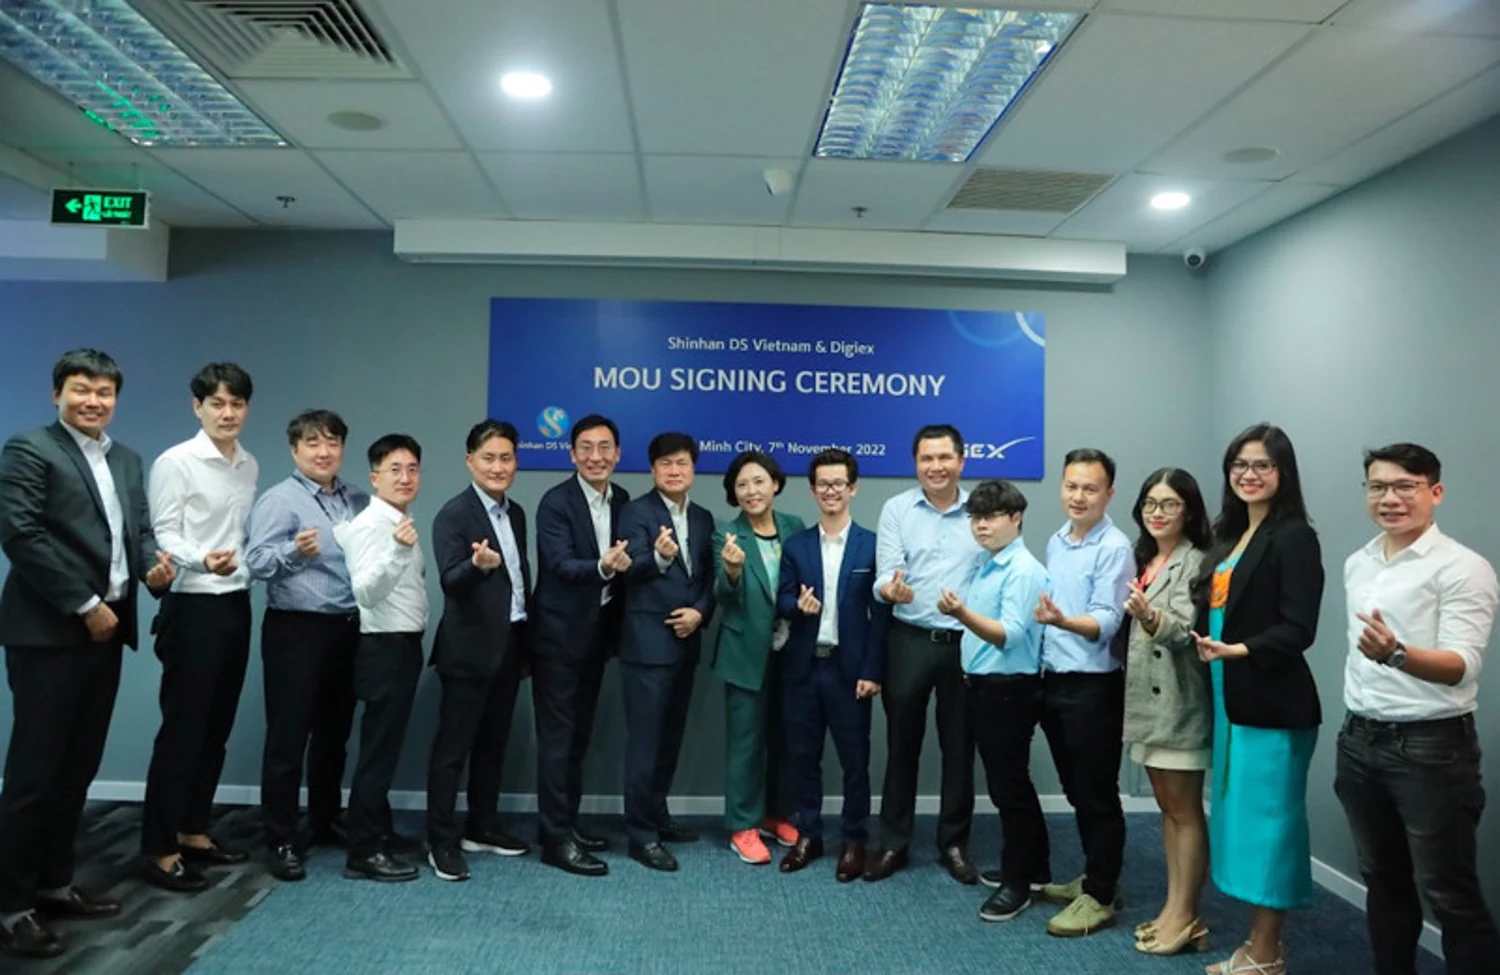 DigiEx Group and Shinhan DS signed a MOU on strategic partnership